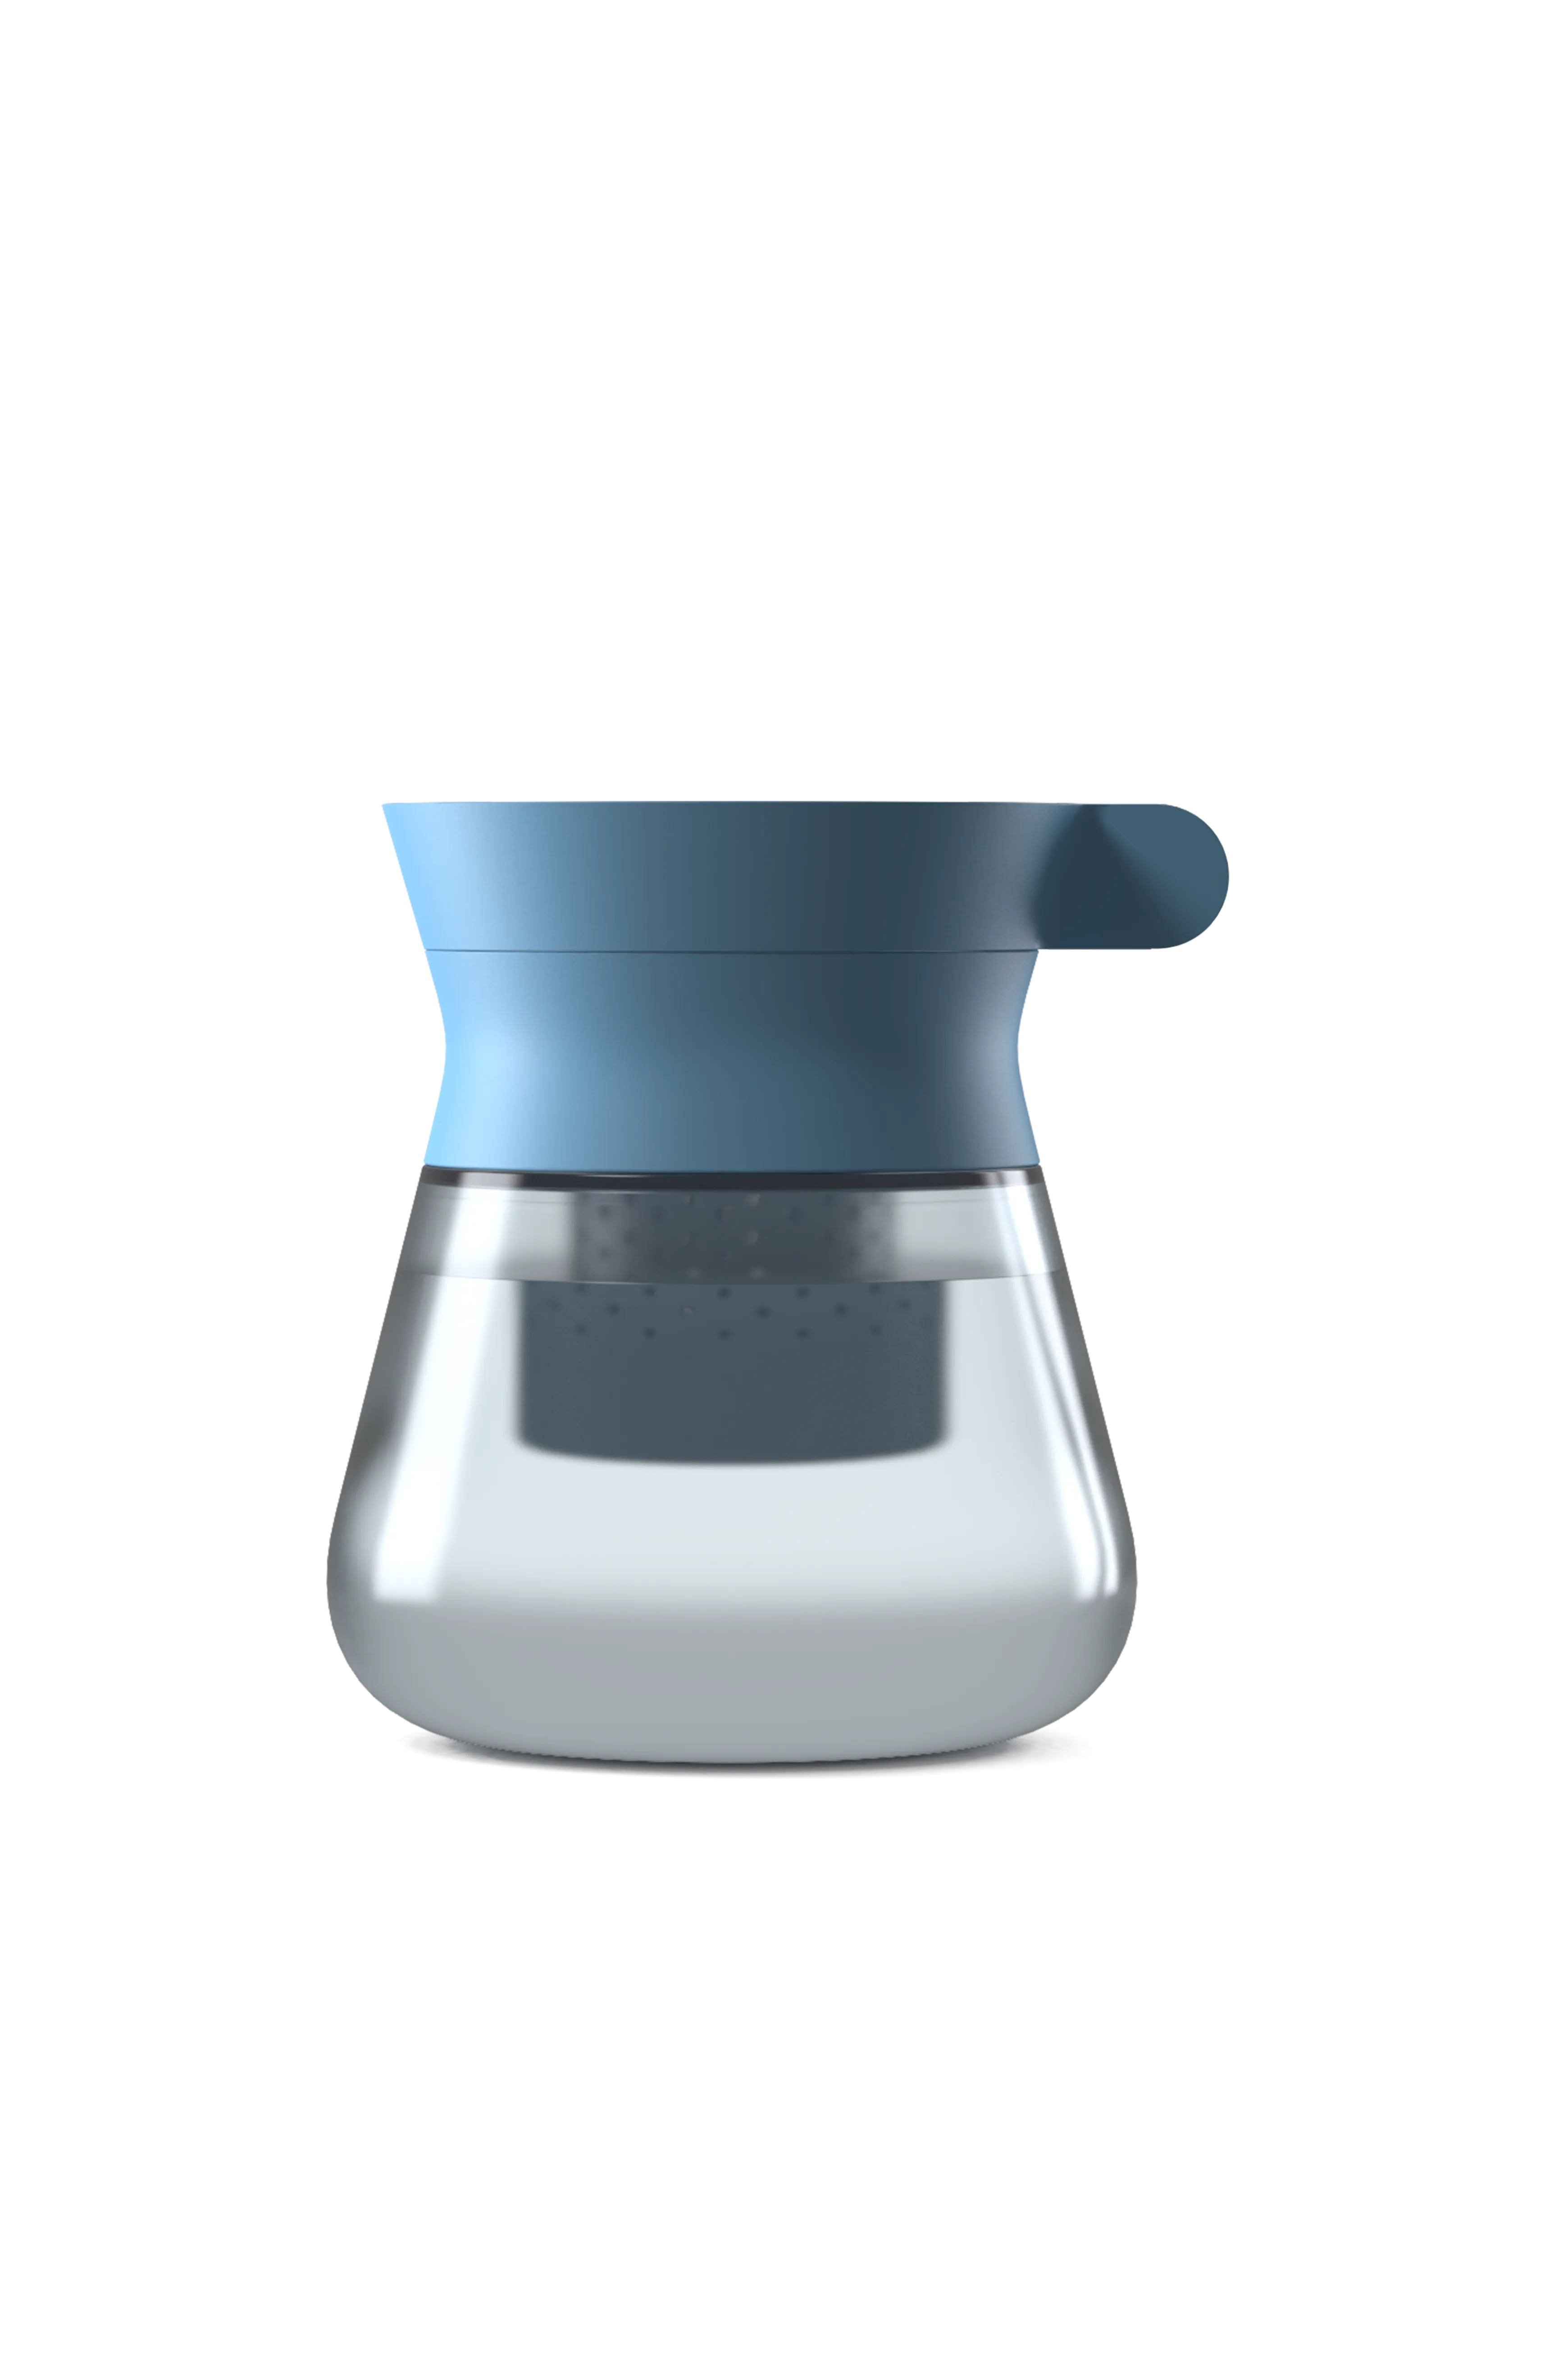 Intoku smart kettle in front of a transparent background